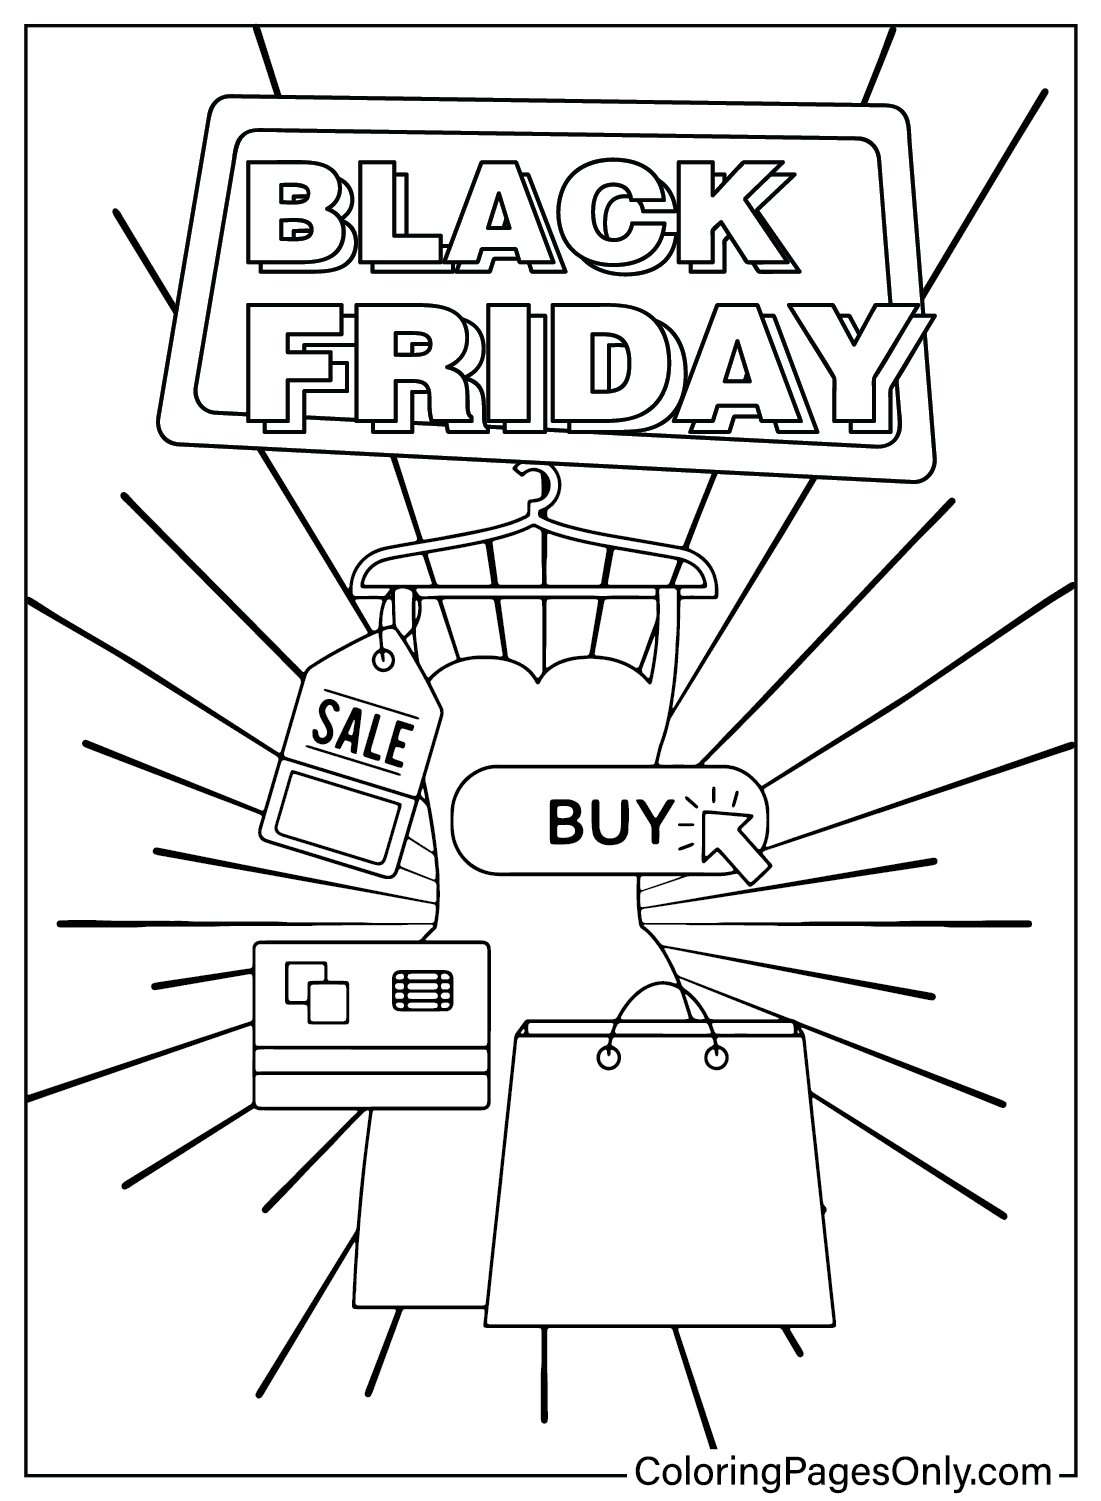 Black Friday Coloring Pages to for Kids from Black Friday